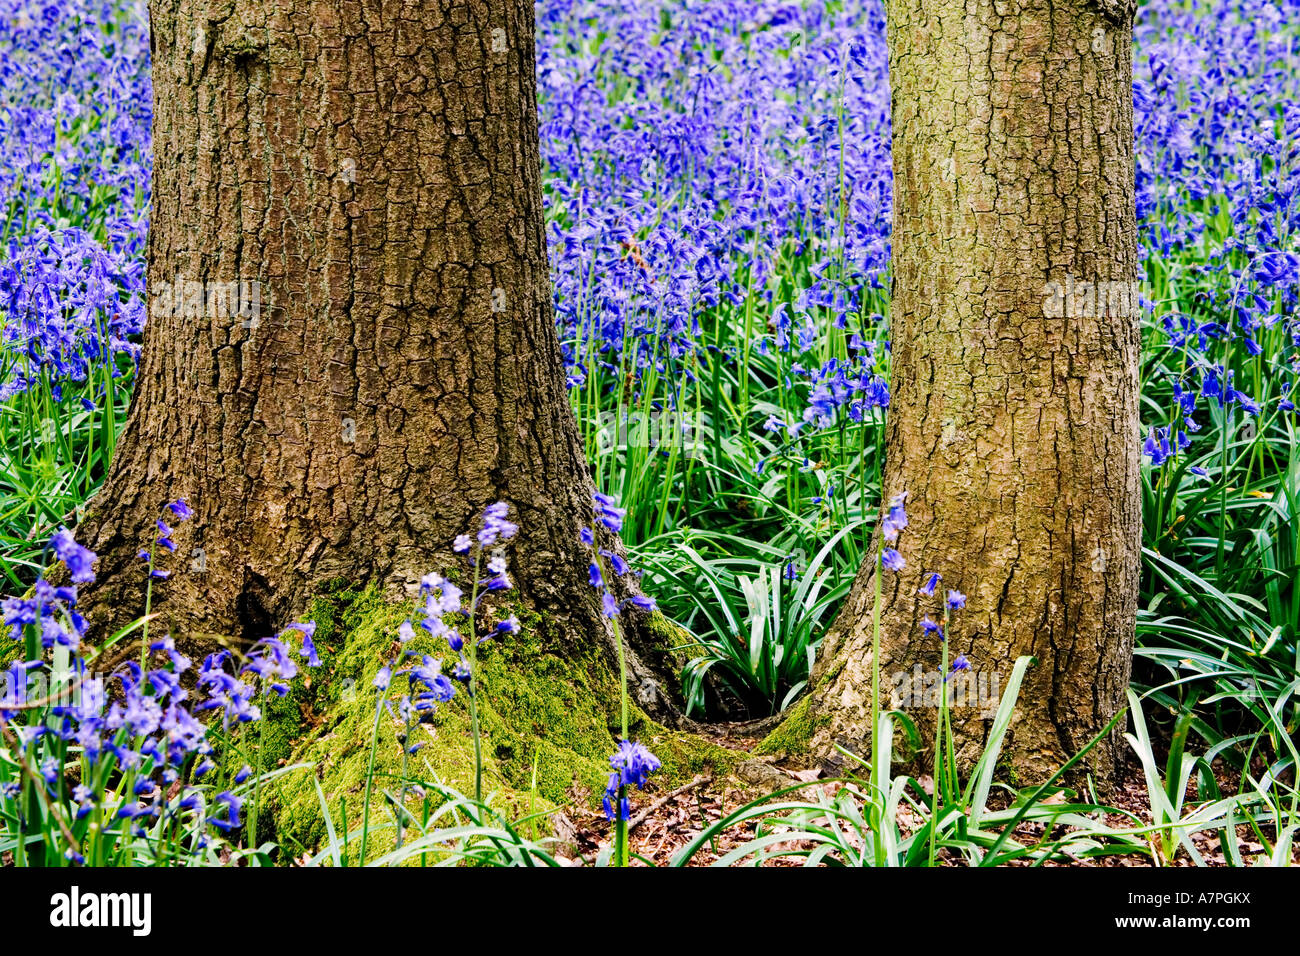 Bluebells in Hagbourne Copse, England, UK Hyacinthoides non-scripta Also known as Wild hyacinth Stock Photo